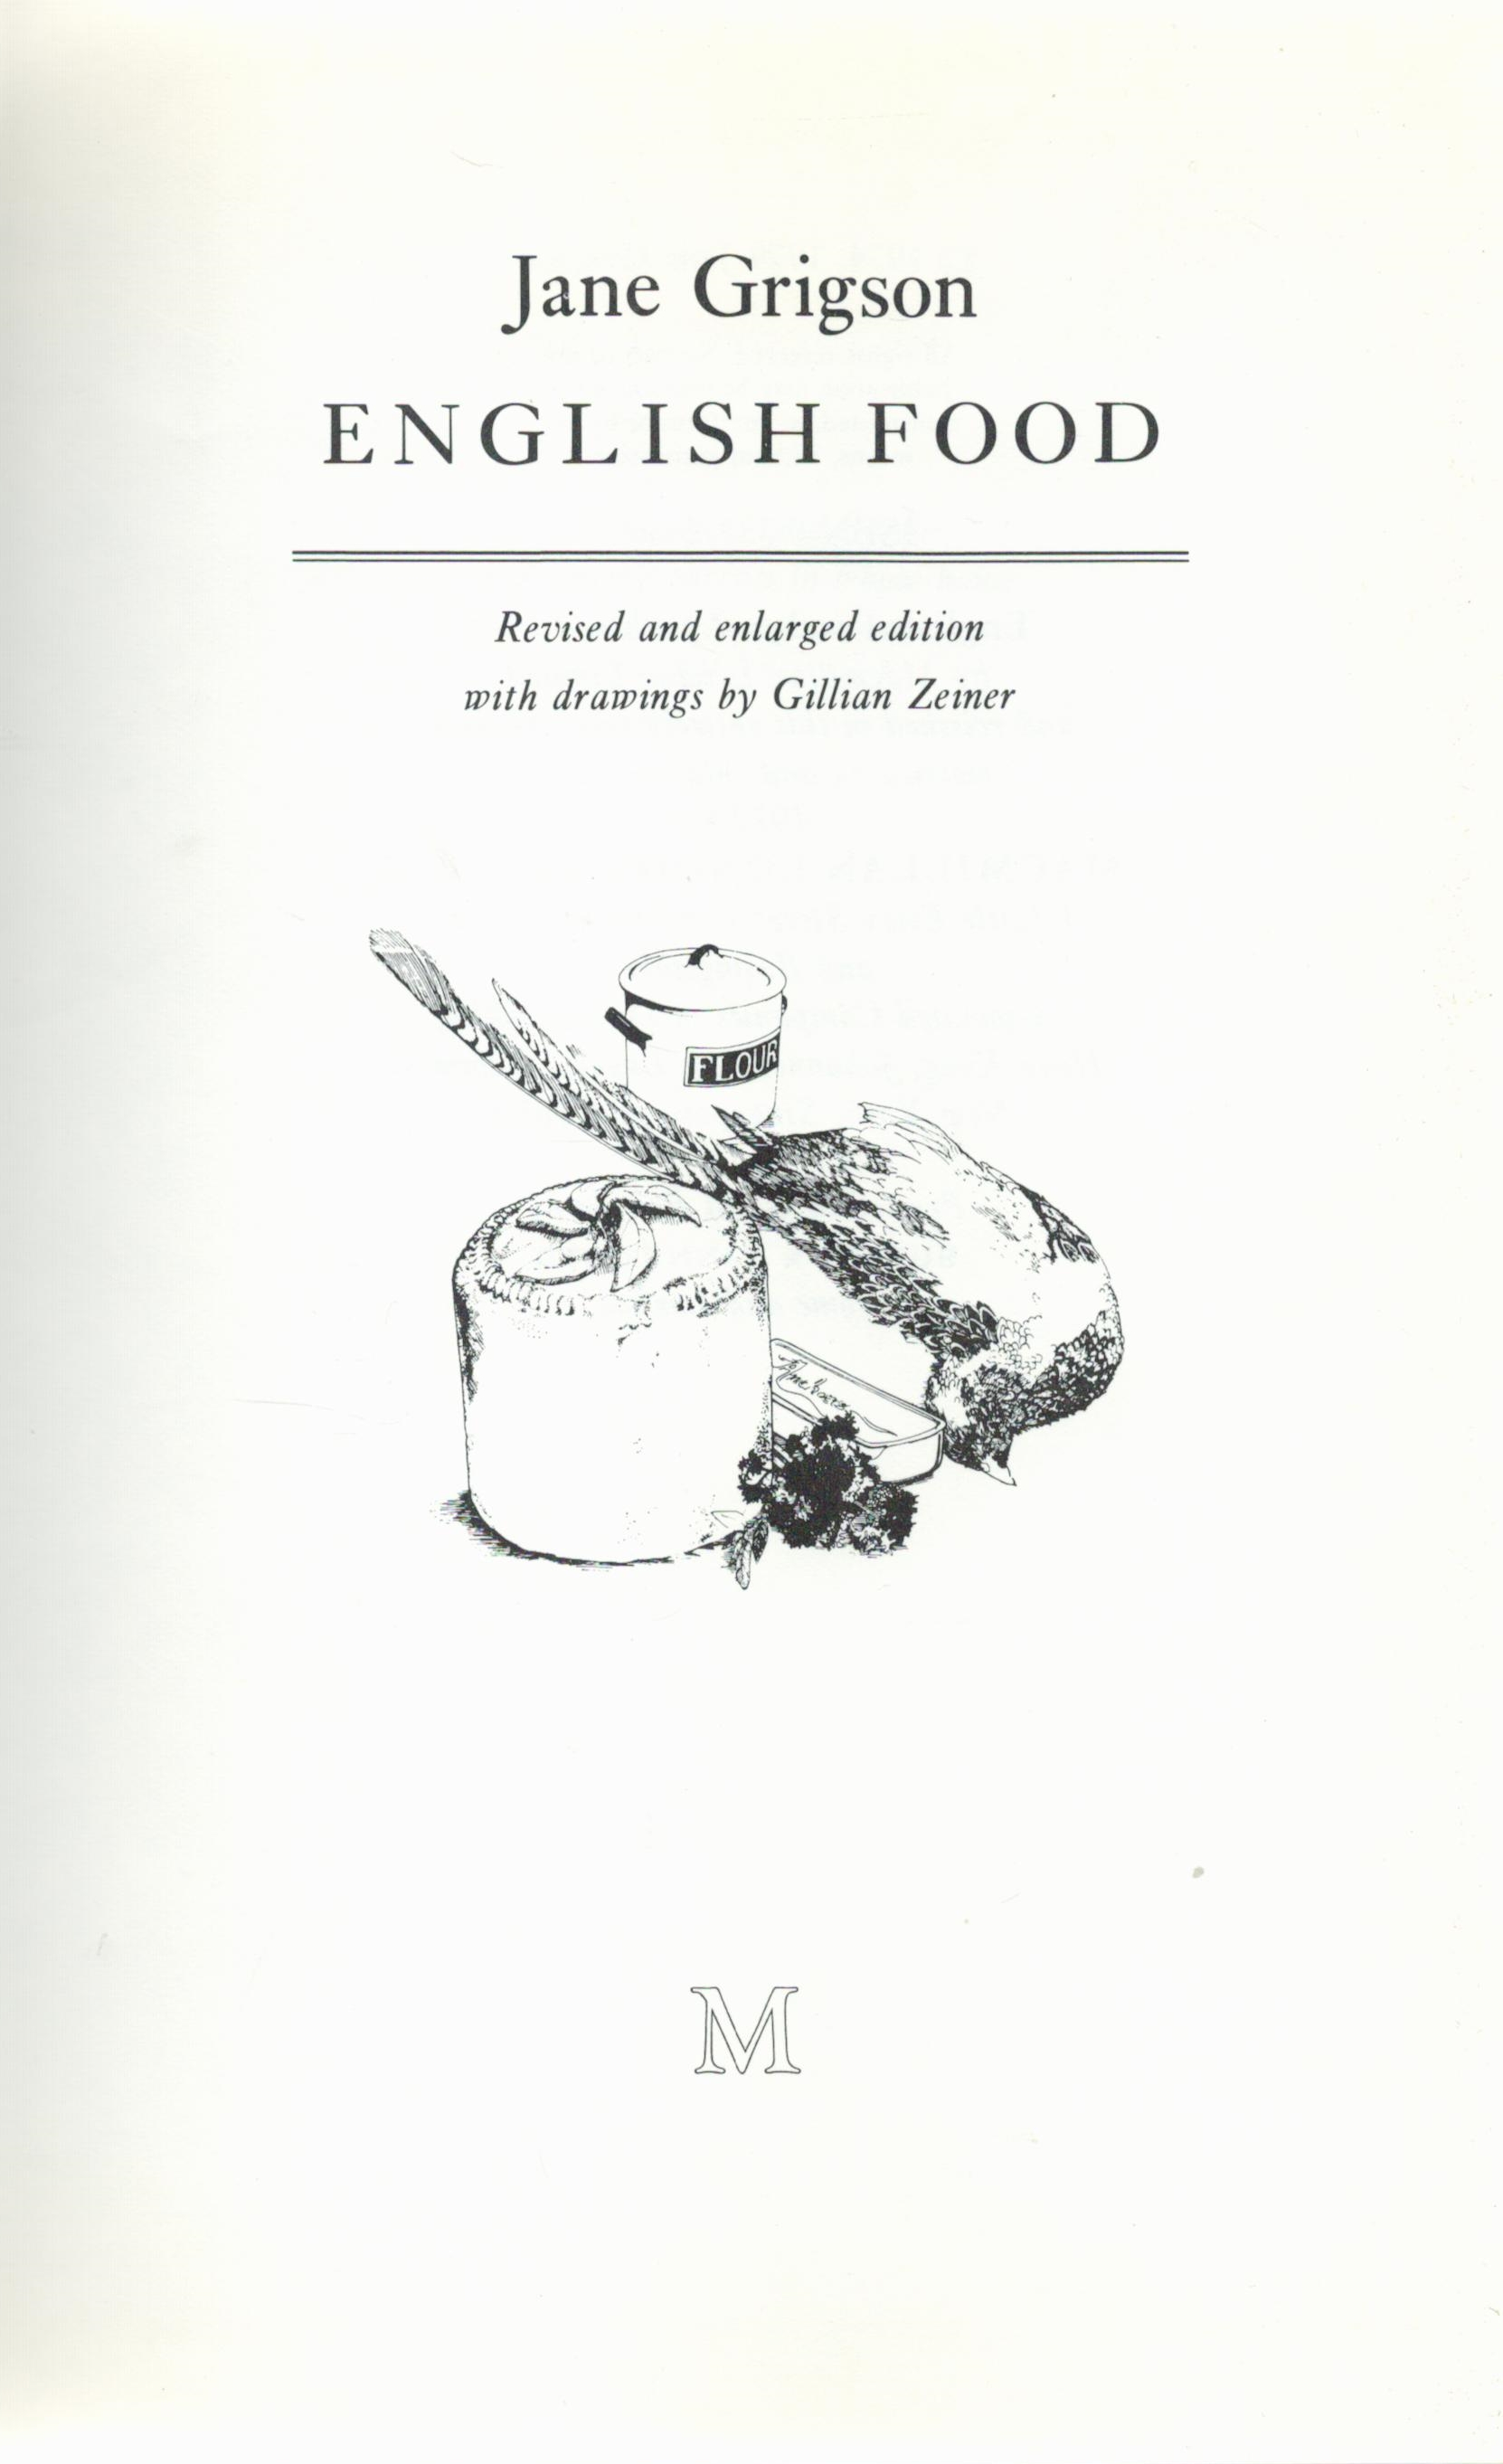 English Food by Jane Grigson Hardback Book 1979 Revised and Enlarged Edition published by - Image 2 of 3